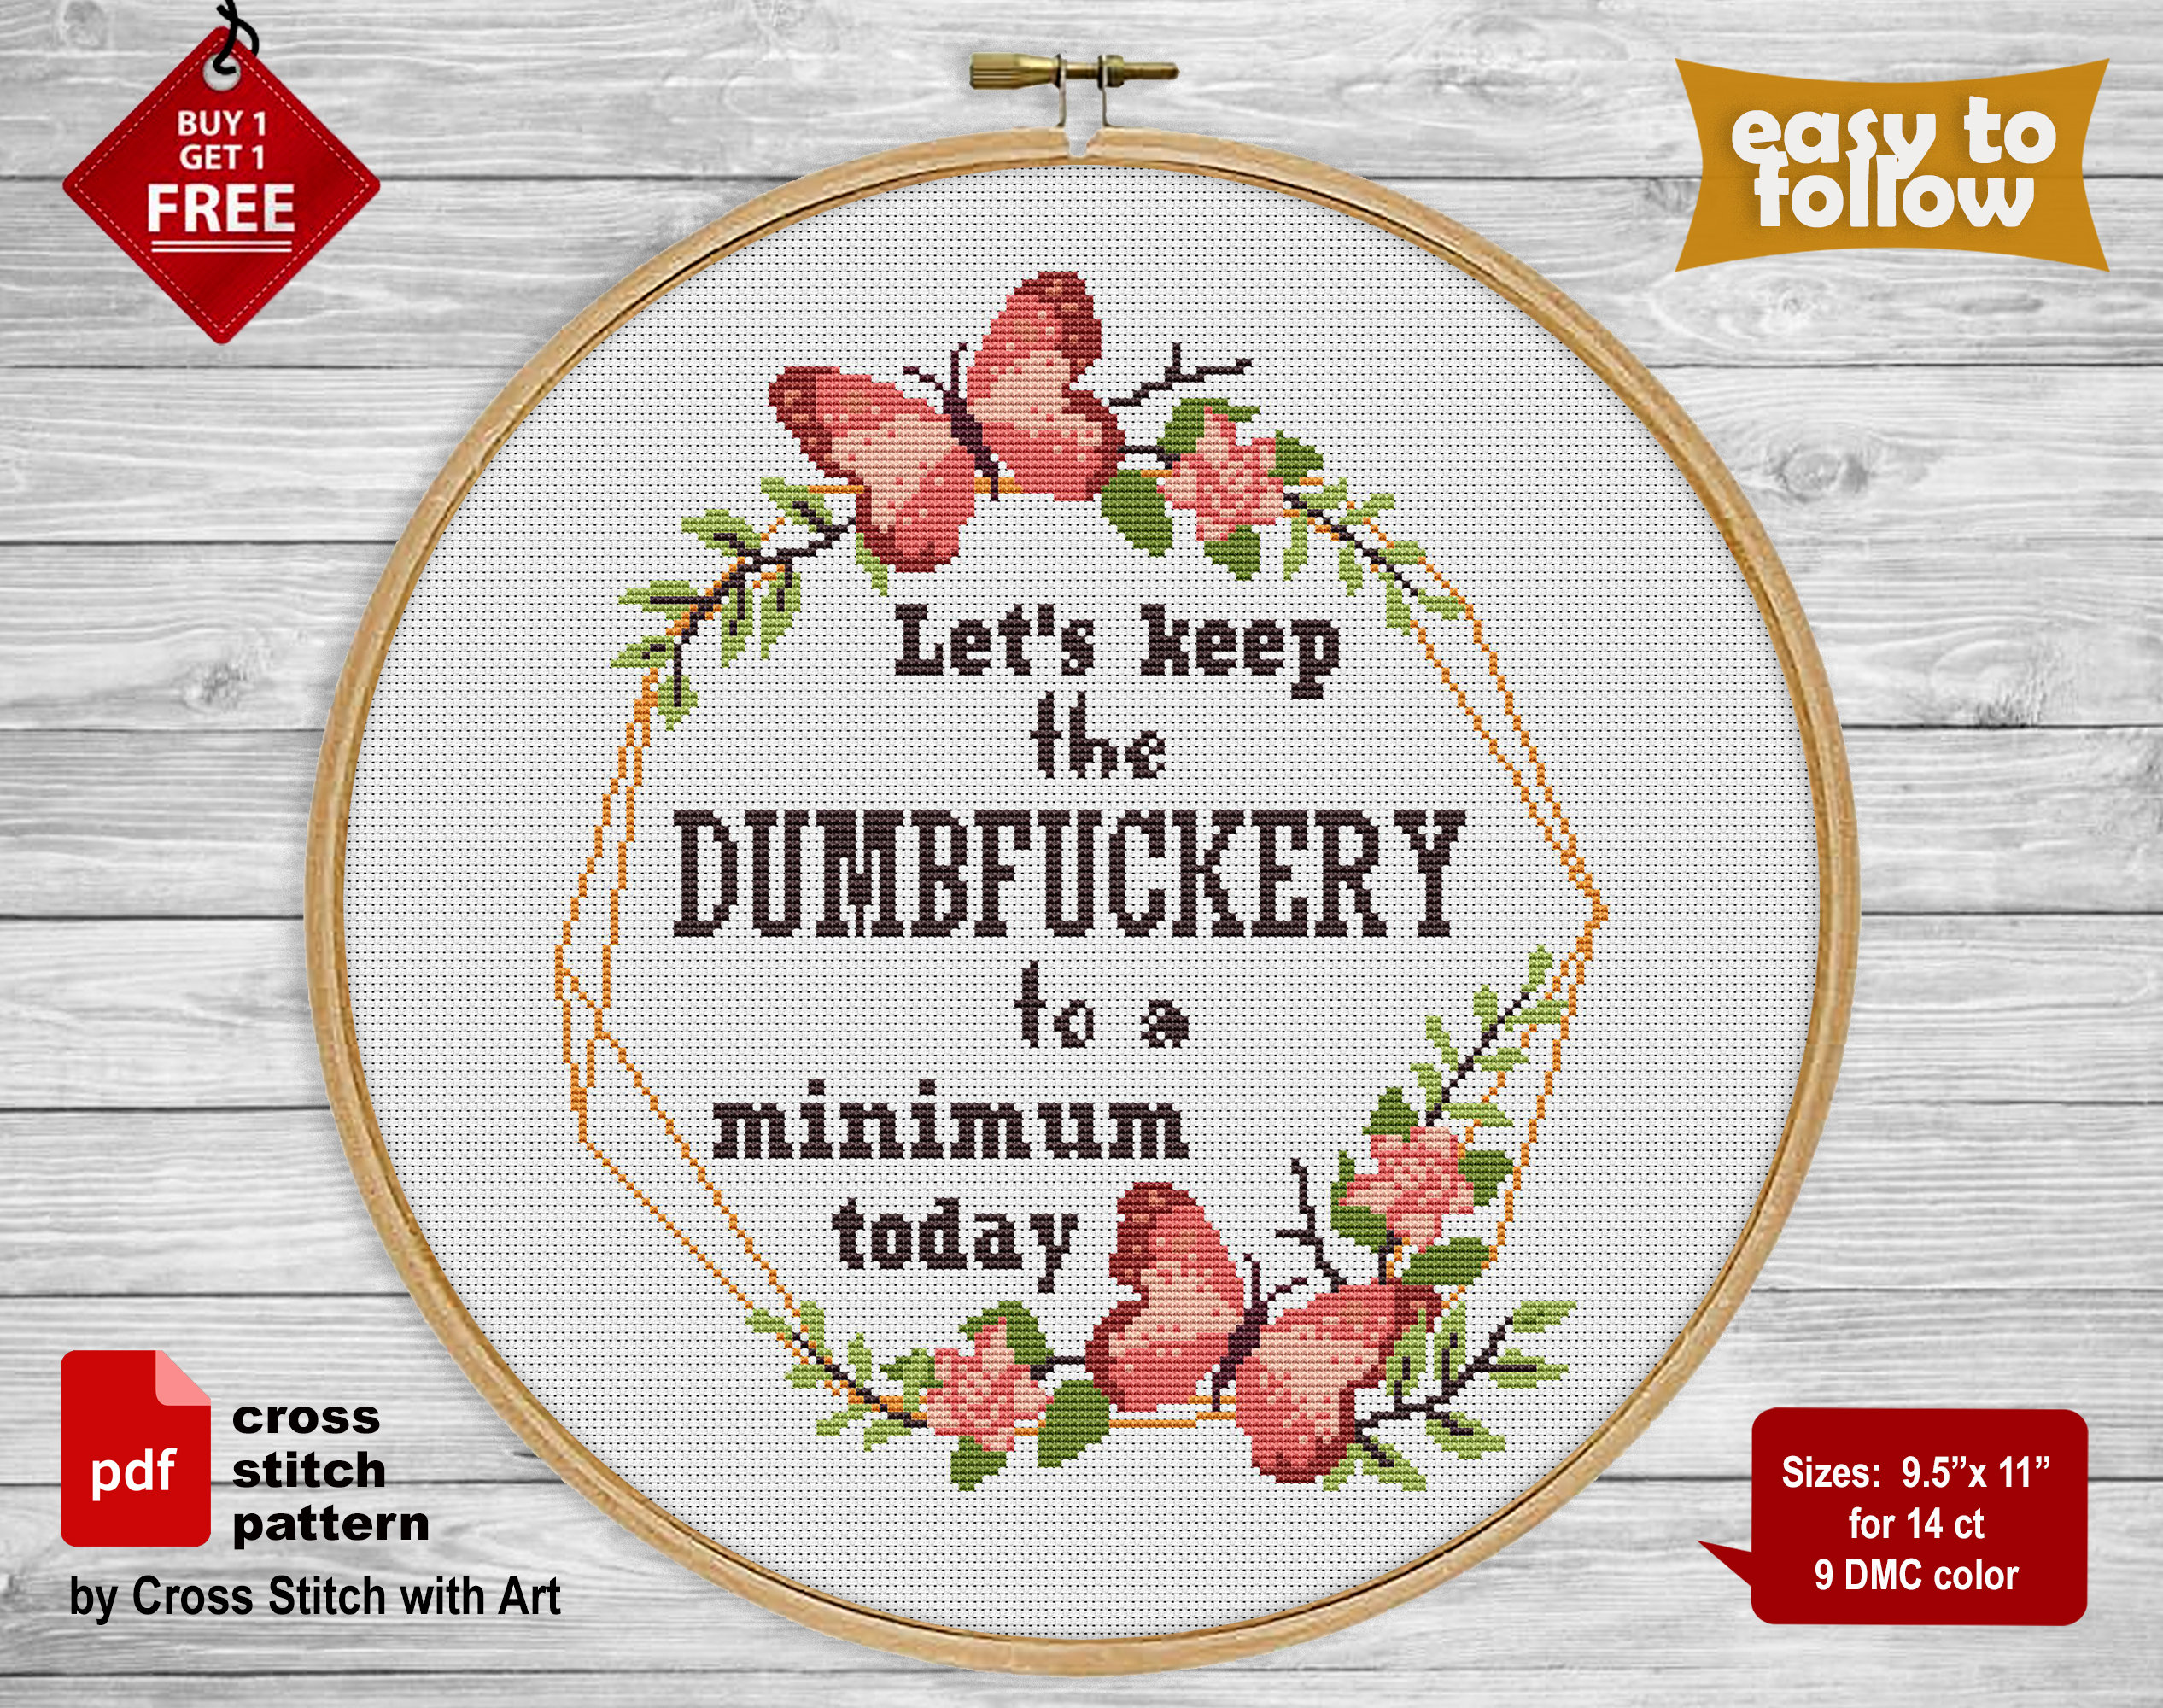 10 Funny cross stitch patterns PDF. Snarky quote. Rude cross - Inspire  Uplift